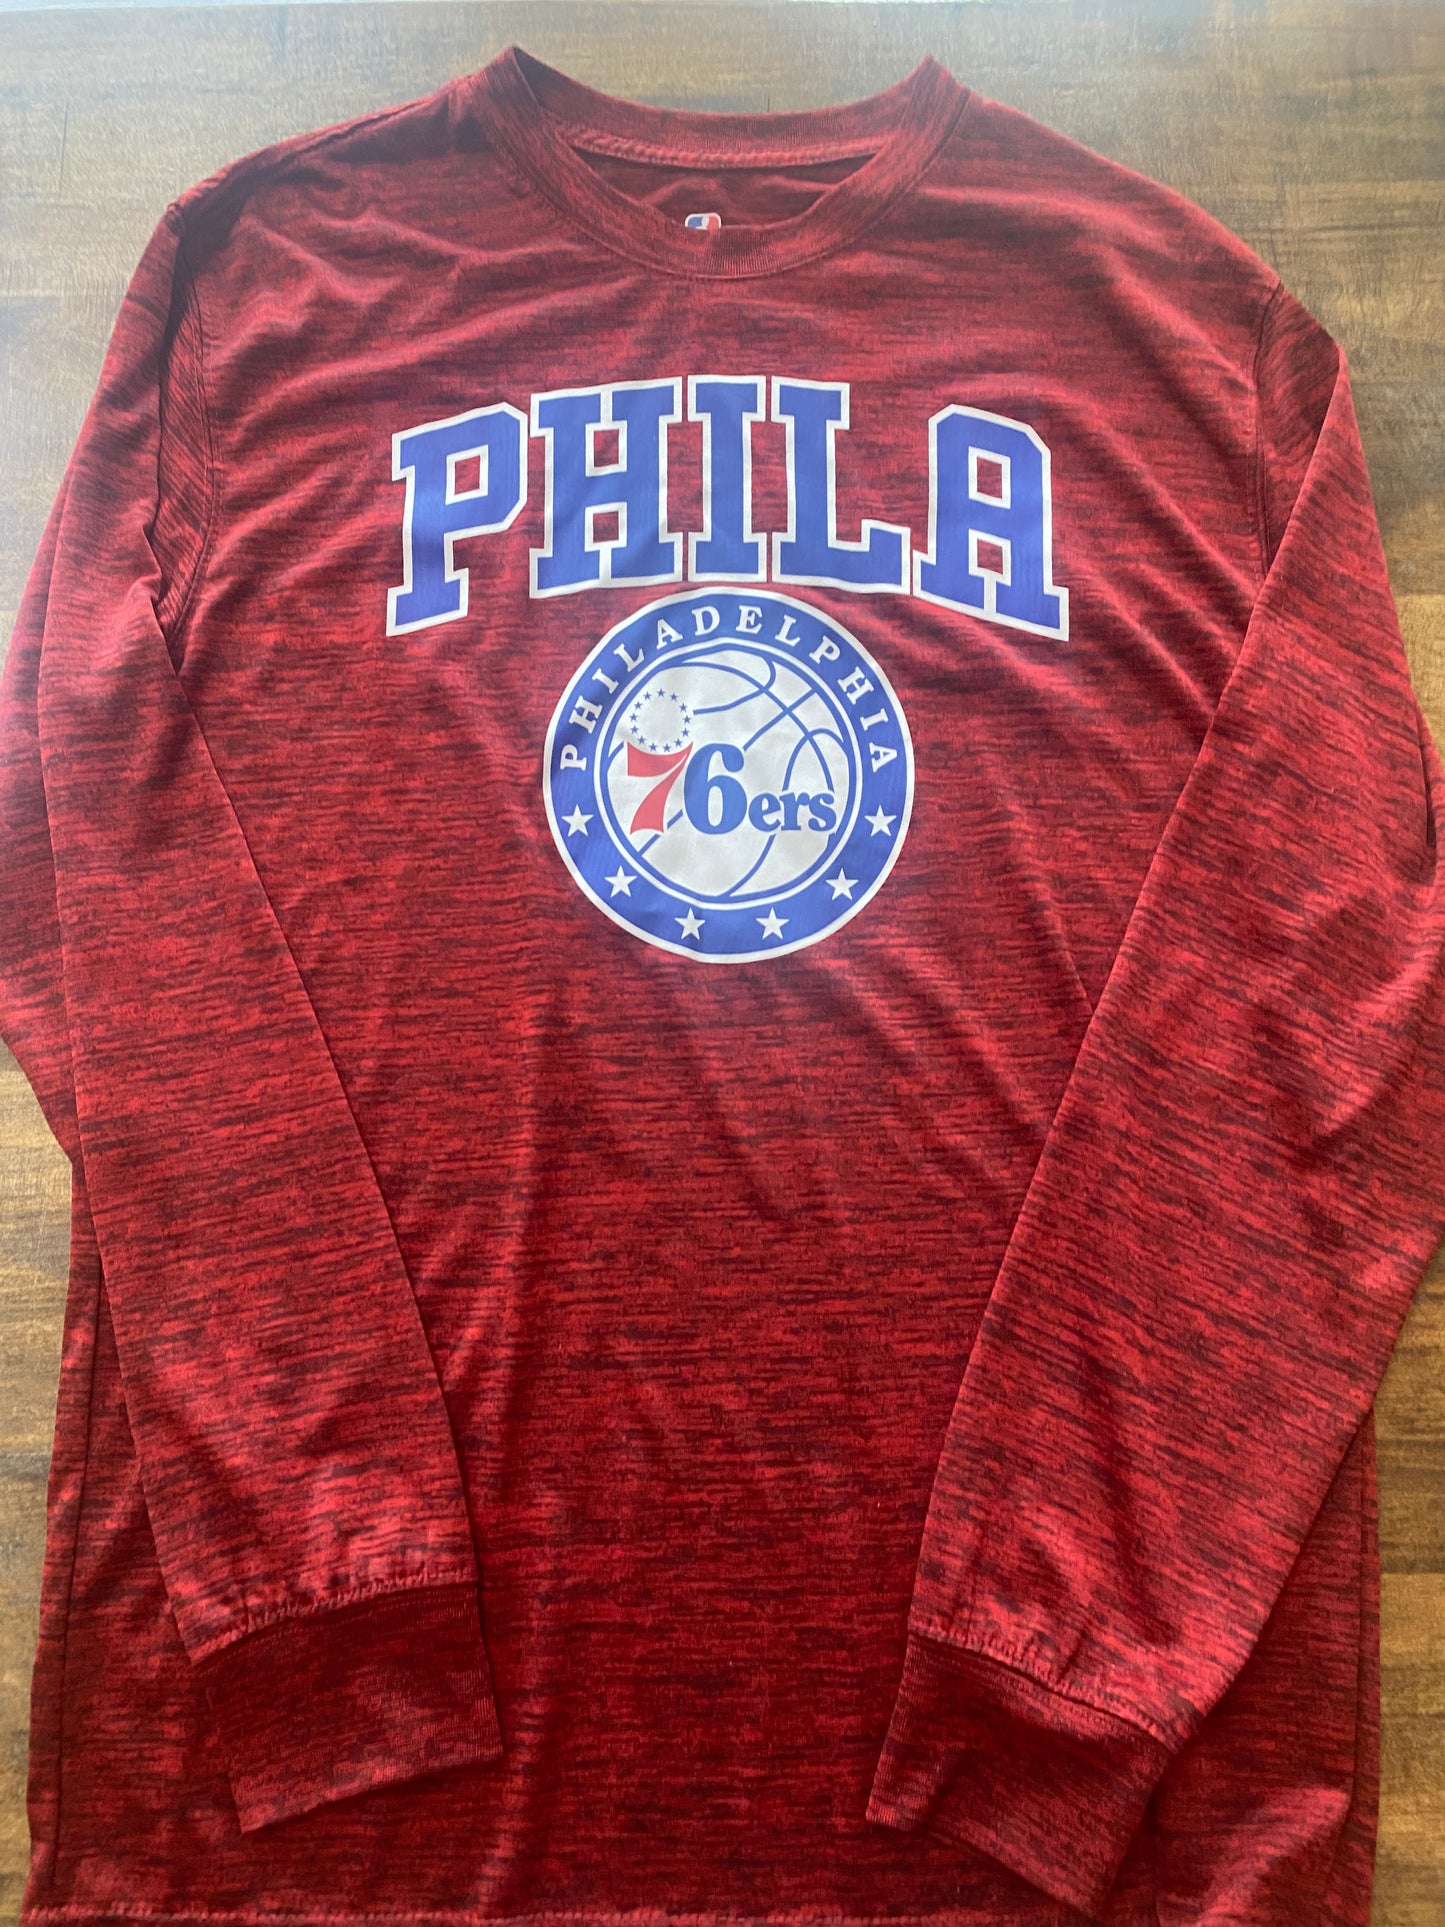 76ers Top Small